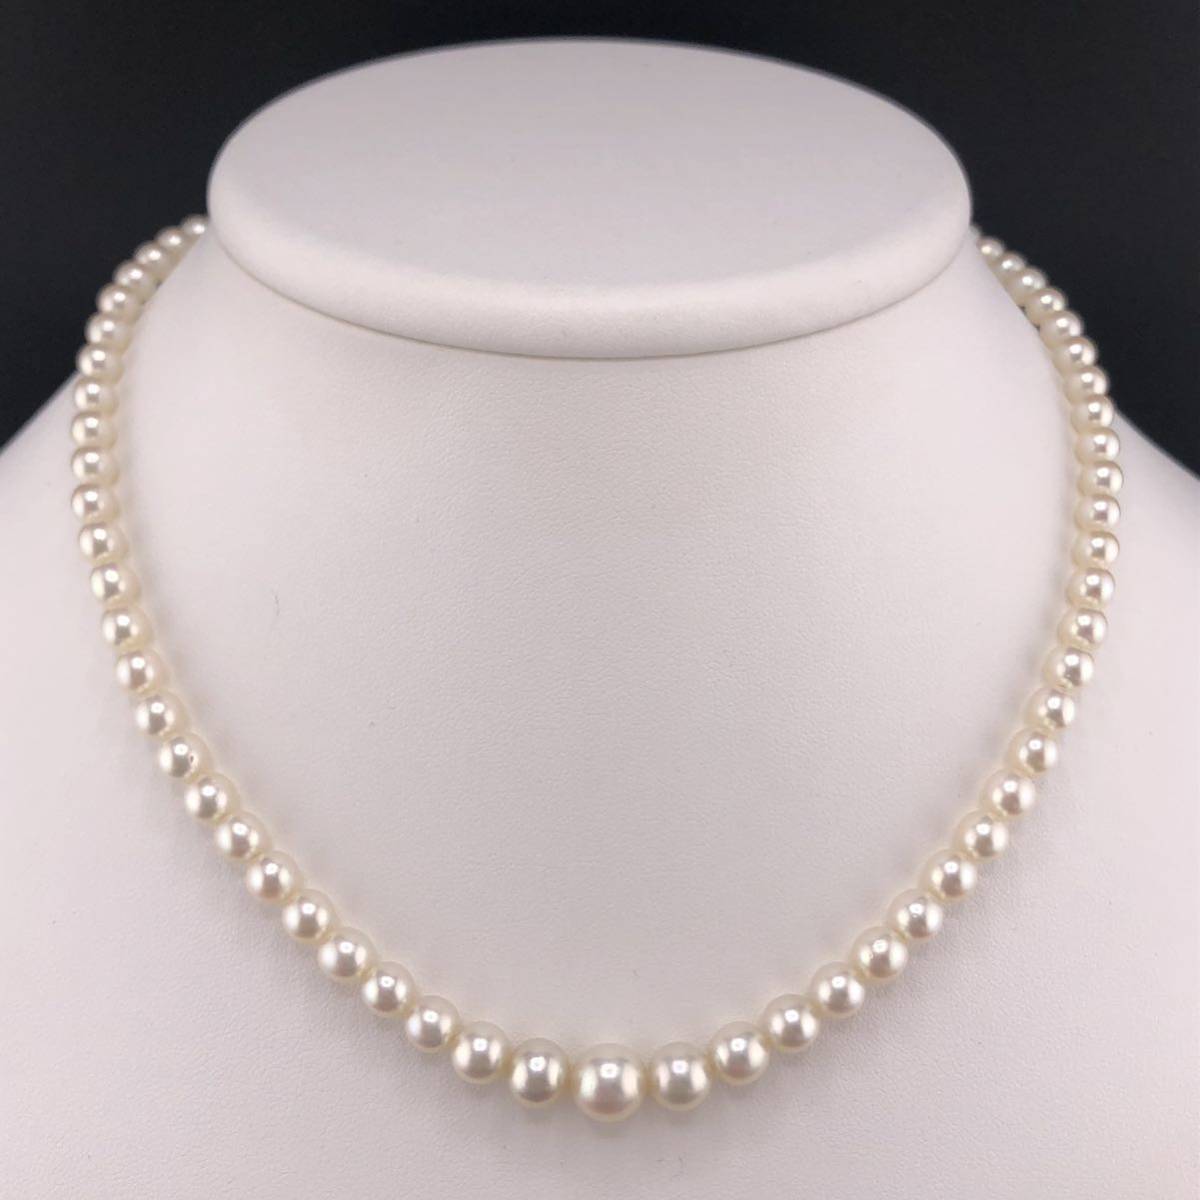 E12-0456 アコヤパールネックレス 4.5mm~7.5mm 41cm 16g ( アコヤ真珠 Pearl necklace SILVER )_画像1